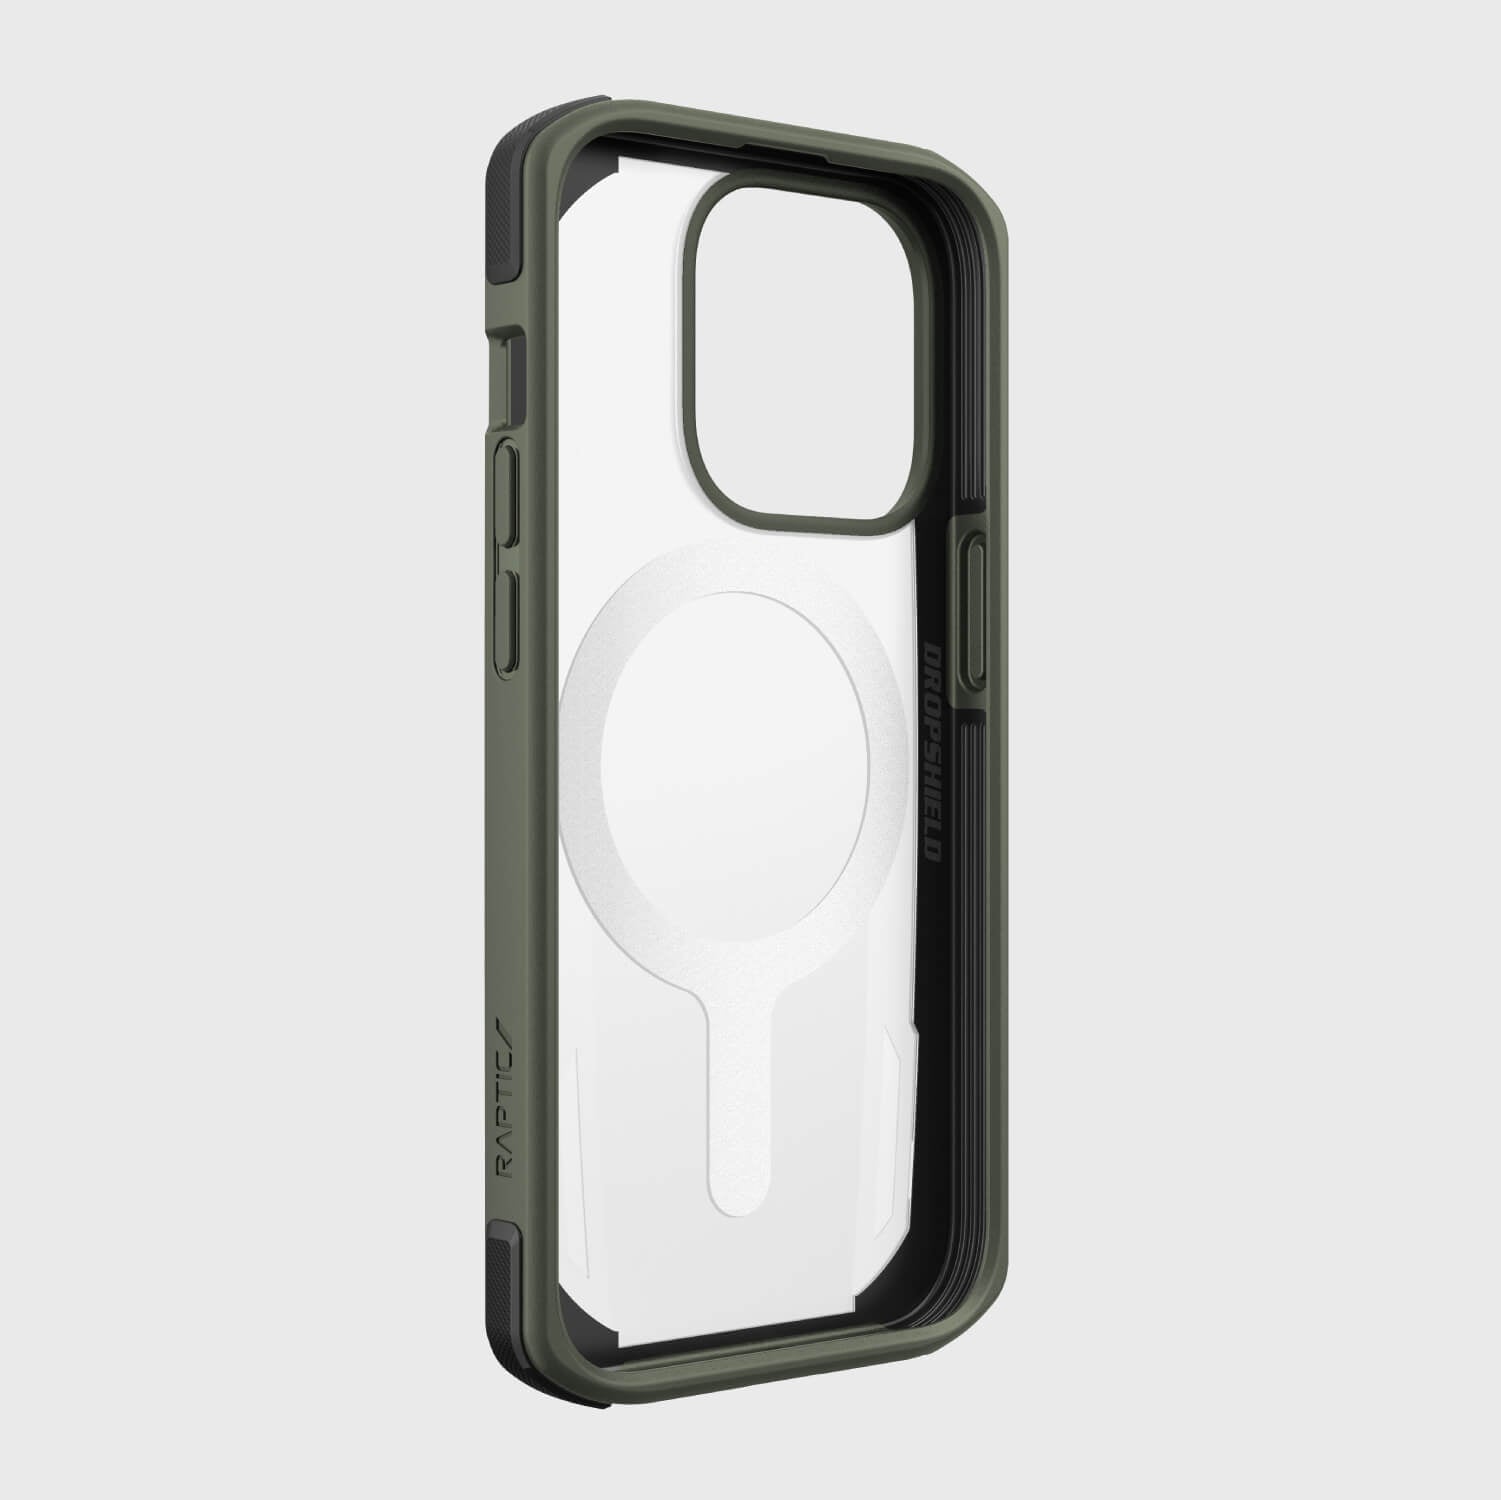 Raptic iPhone 14 Pro Case ~ Secure built for MagSafe in olive green.